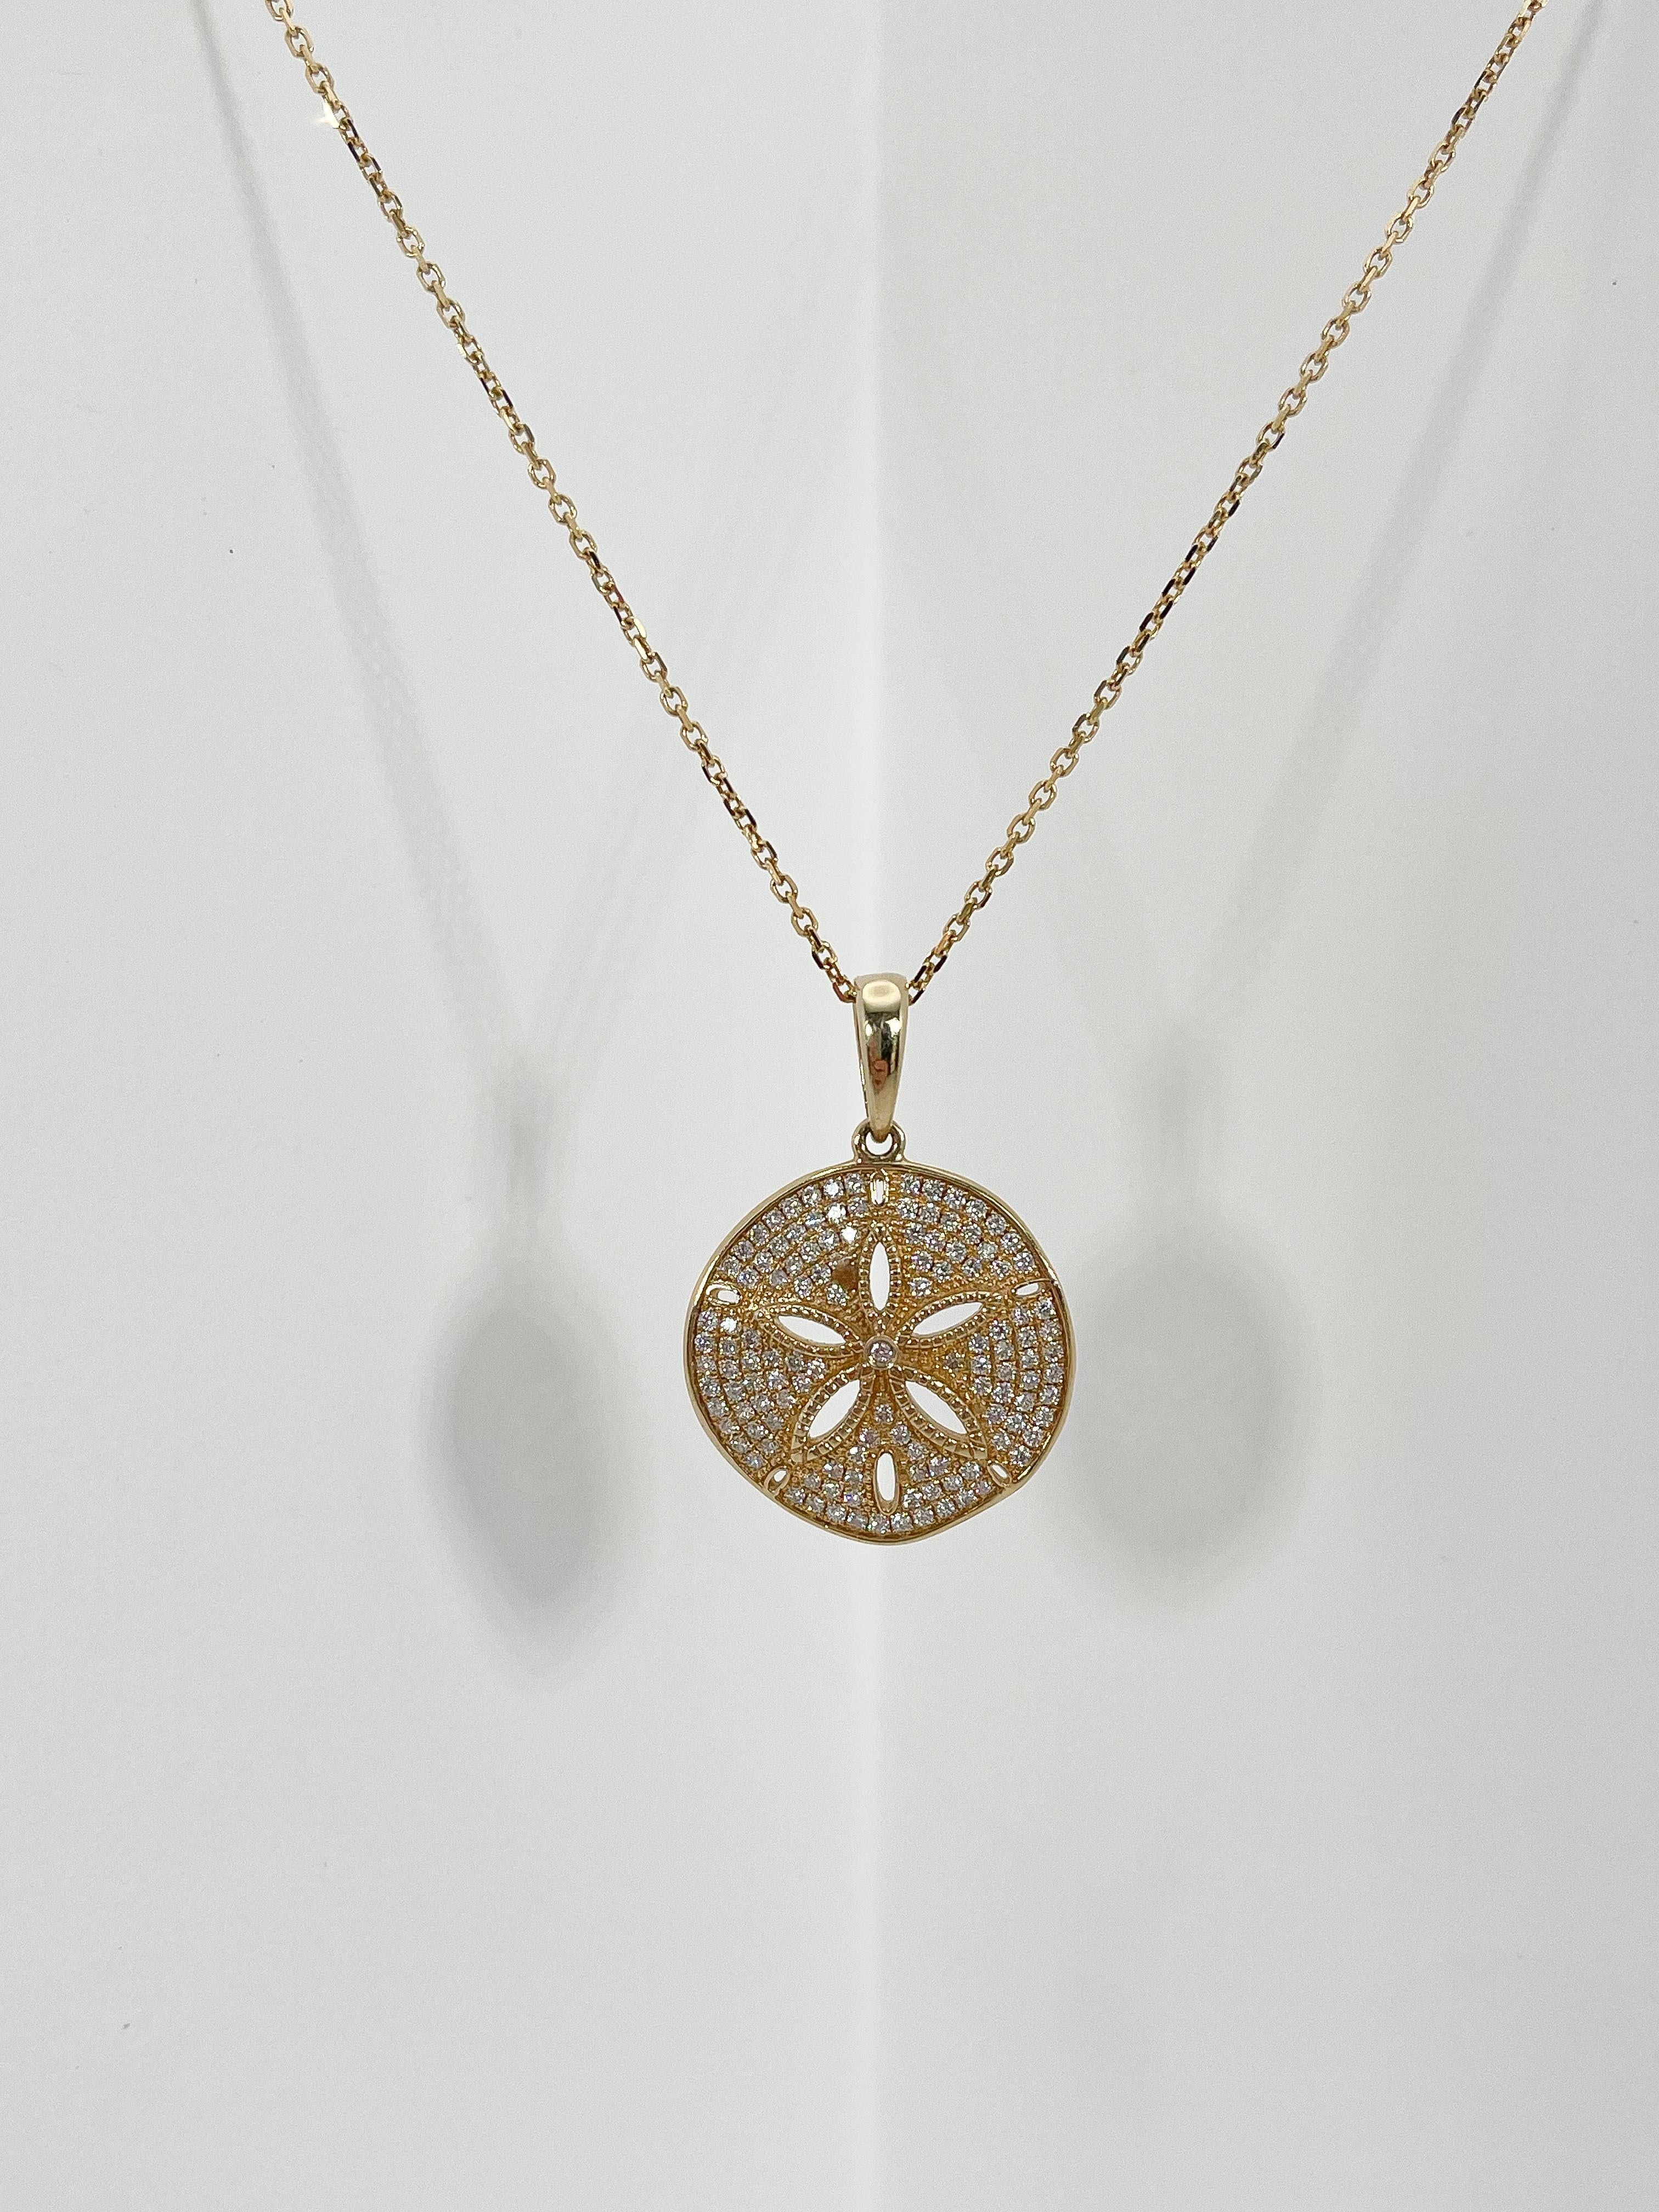 14k yellow gold diamond sand dollar pendant necklace. Pendant comes on an 18 inch diamond cut cable chain, all diamonds in the pendant are round, the sand dollar has a diameter of 21.3mm, has a lobster clasp to open and close, and the necklace has a